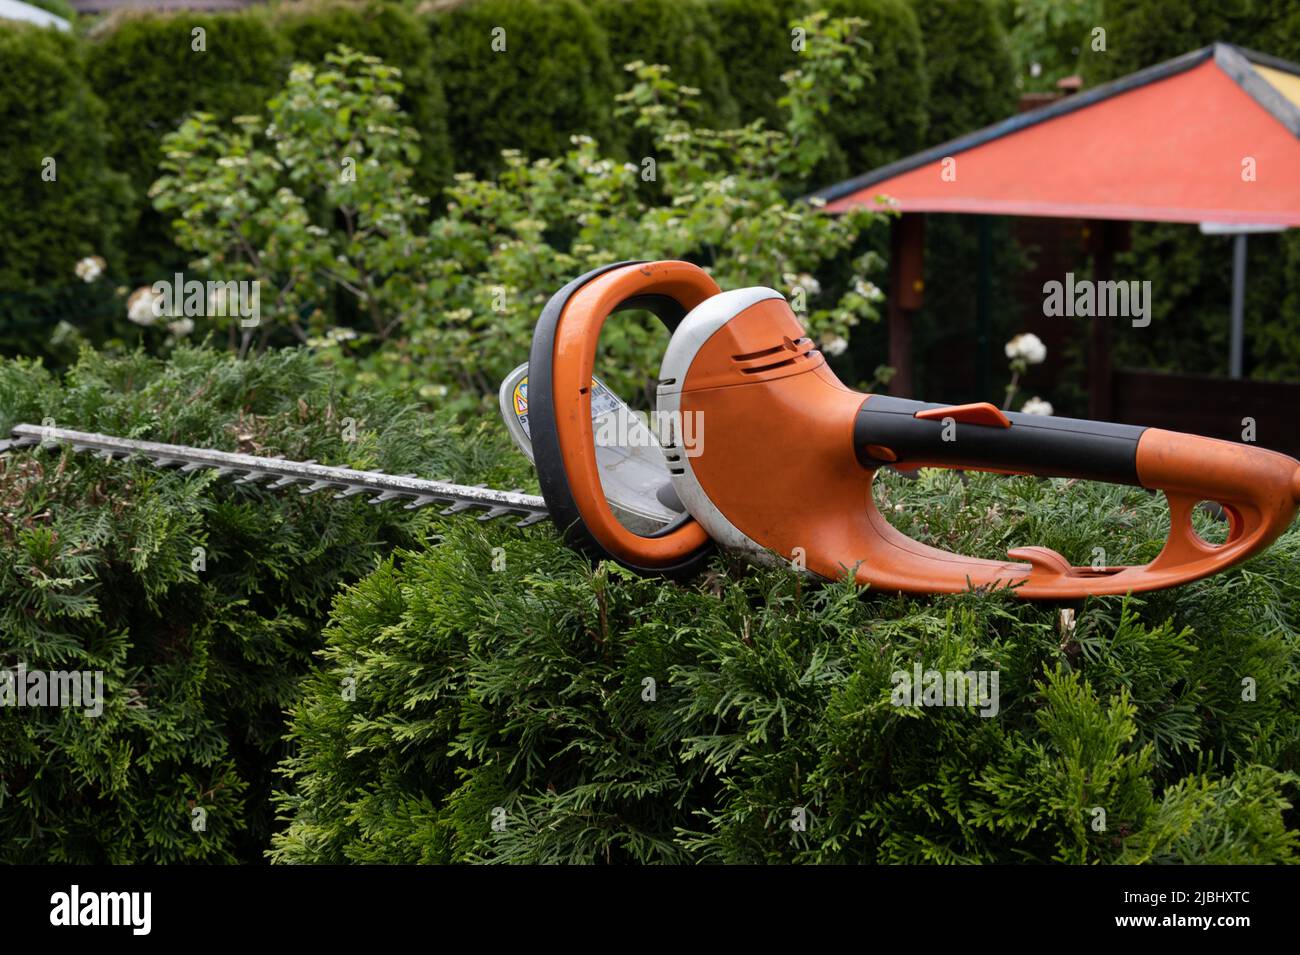 Trimming beautiful green thuja in the garden with an electric hedge saw. Hedge trimming with a professional long blade saw. Stock Photo